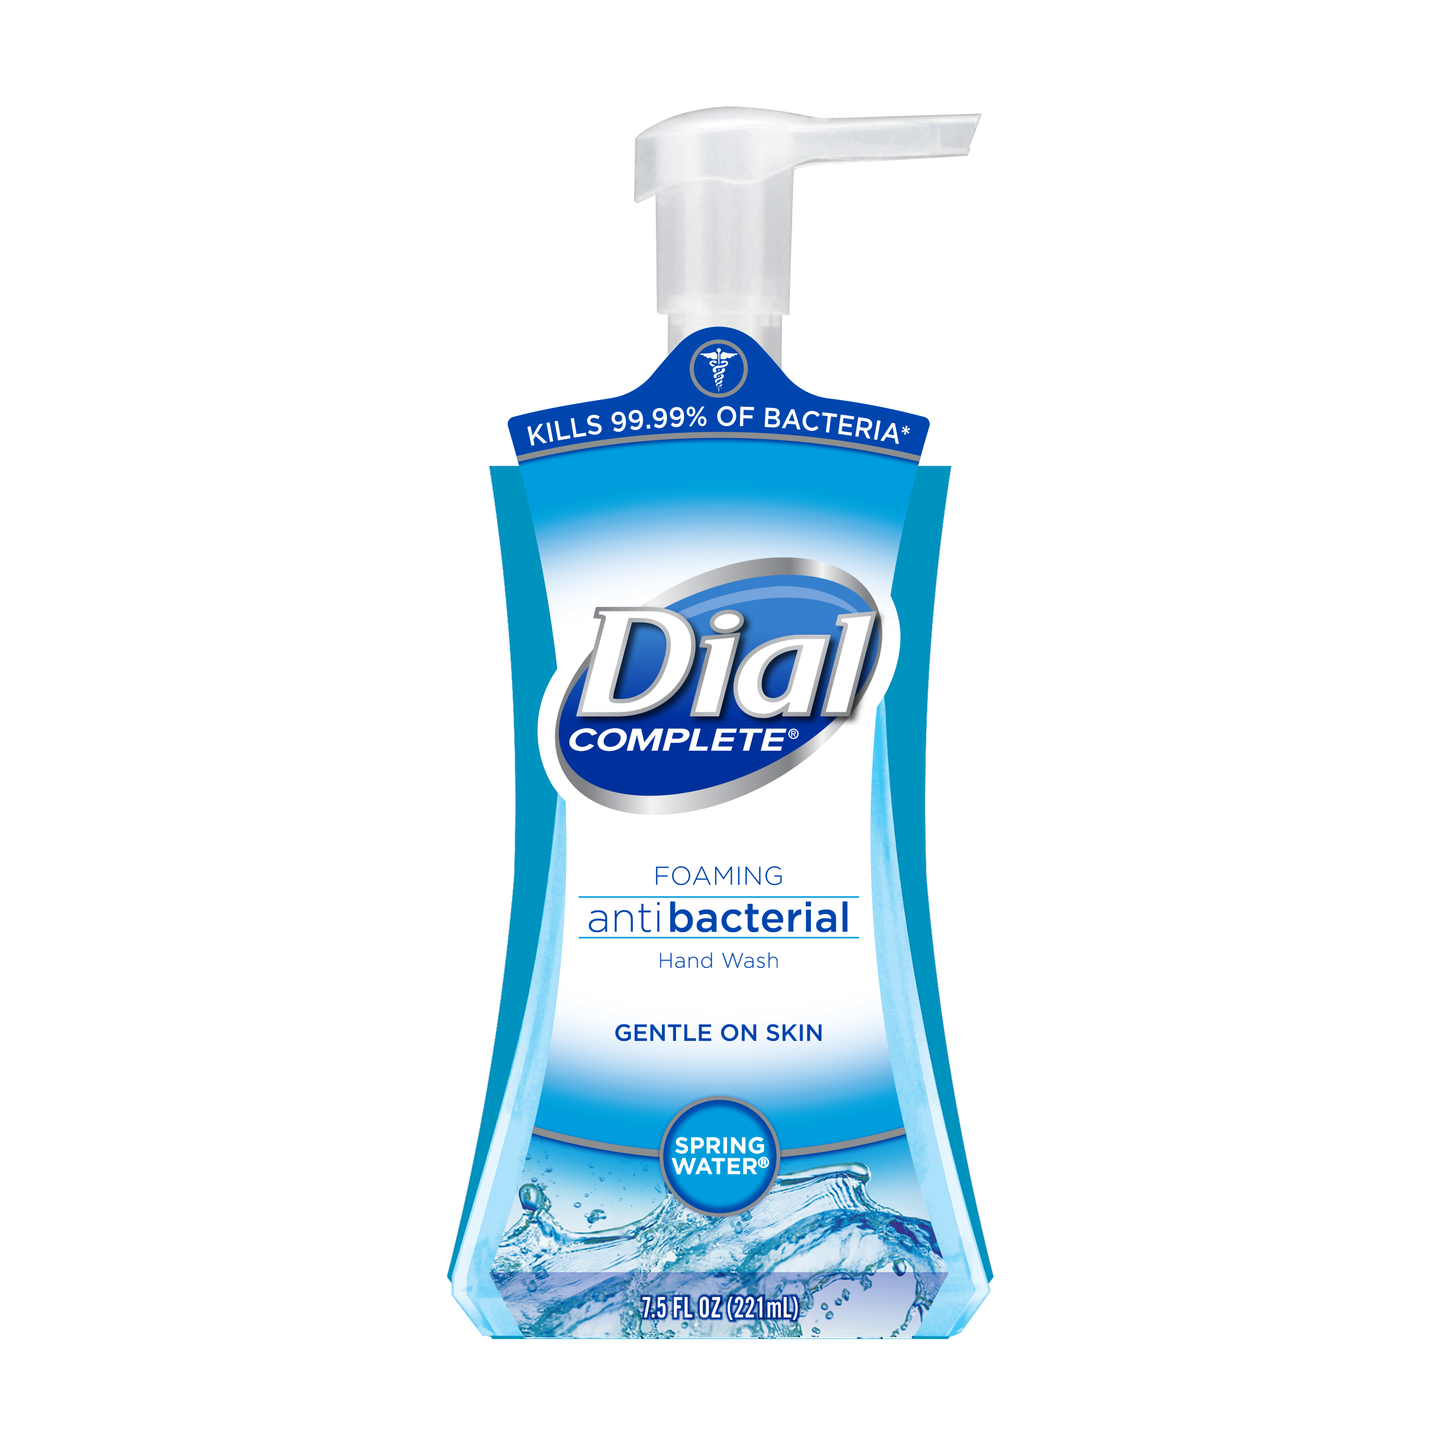 Dial Complete Hand Wash Foaming Antibacterial 7.5 ounce